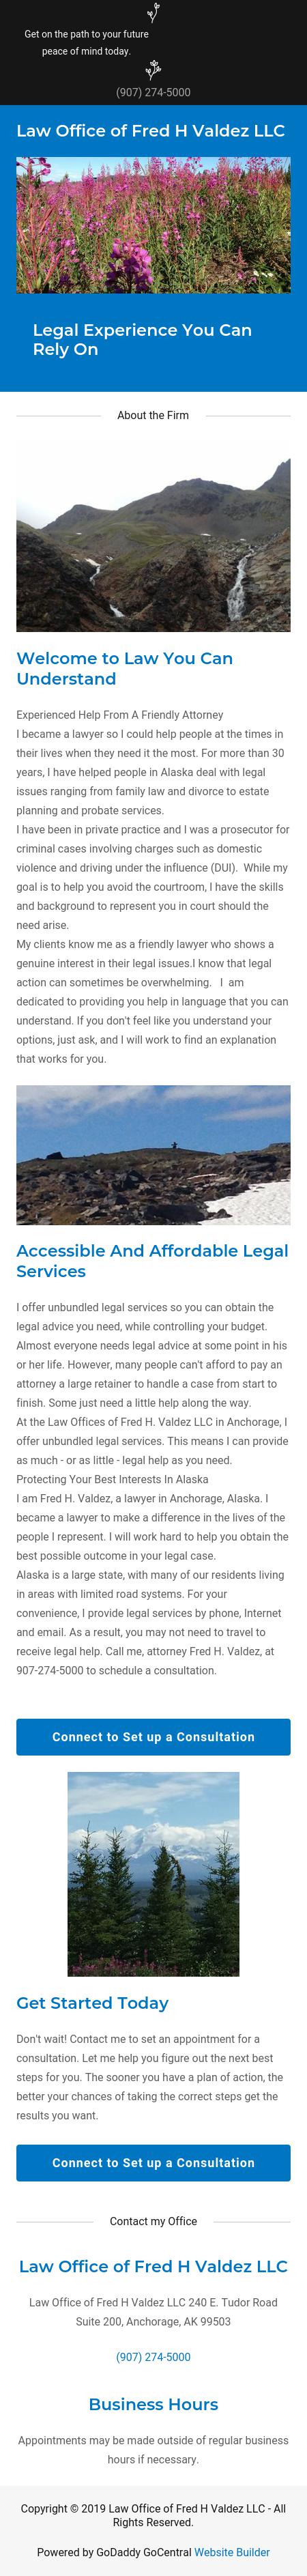 Law Offices of Fred H. Valdez LLC - Anchorage AK Lawyers